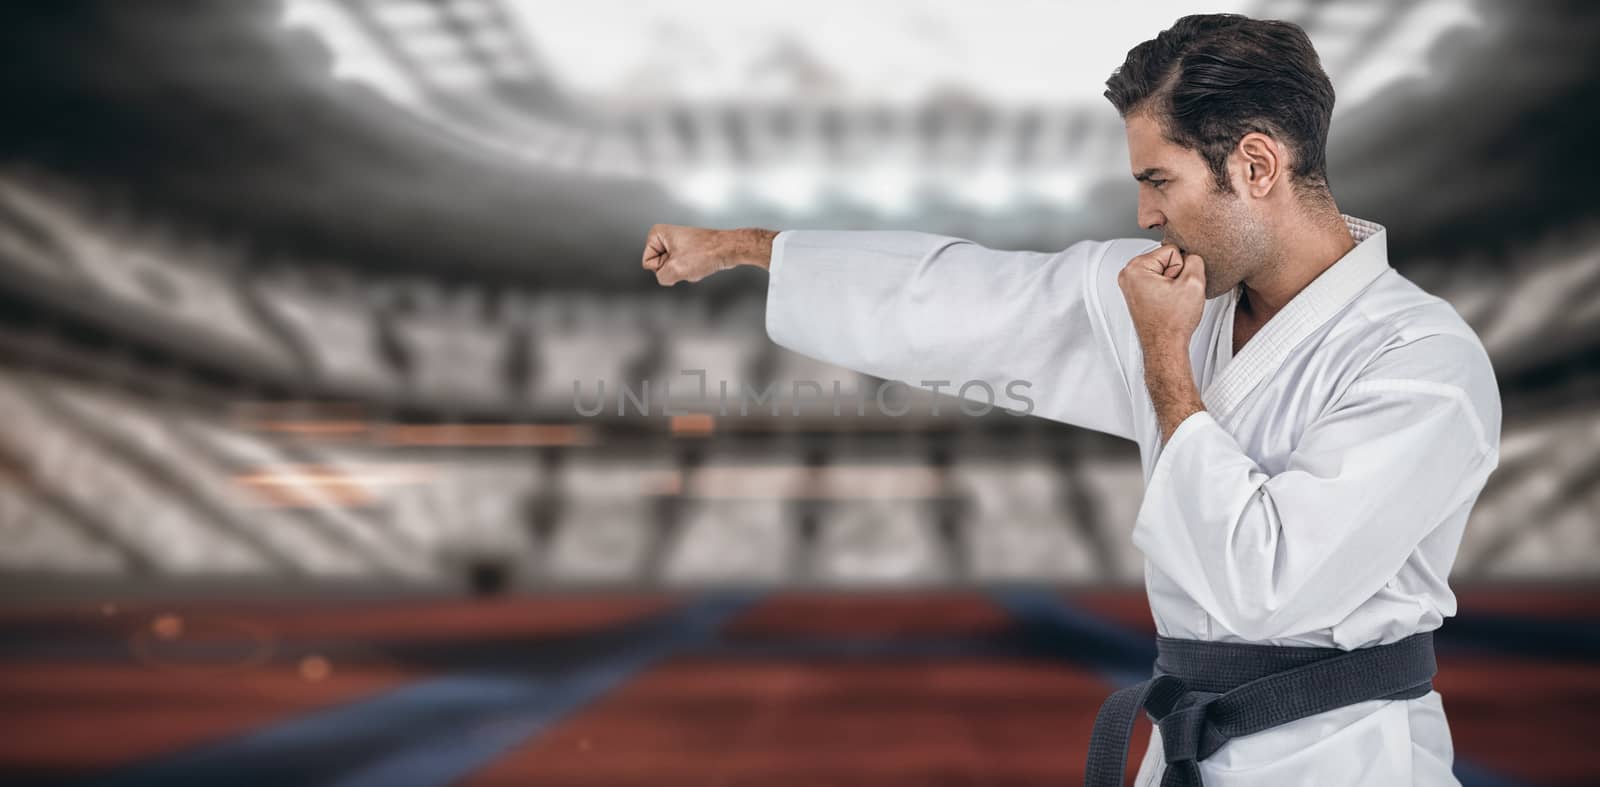 Fighter performing karate stance against digitally generated image of stadium